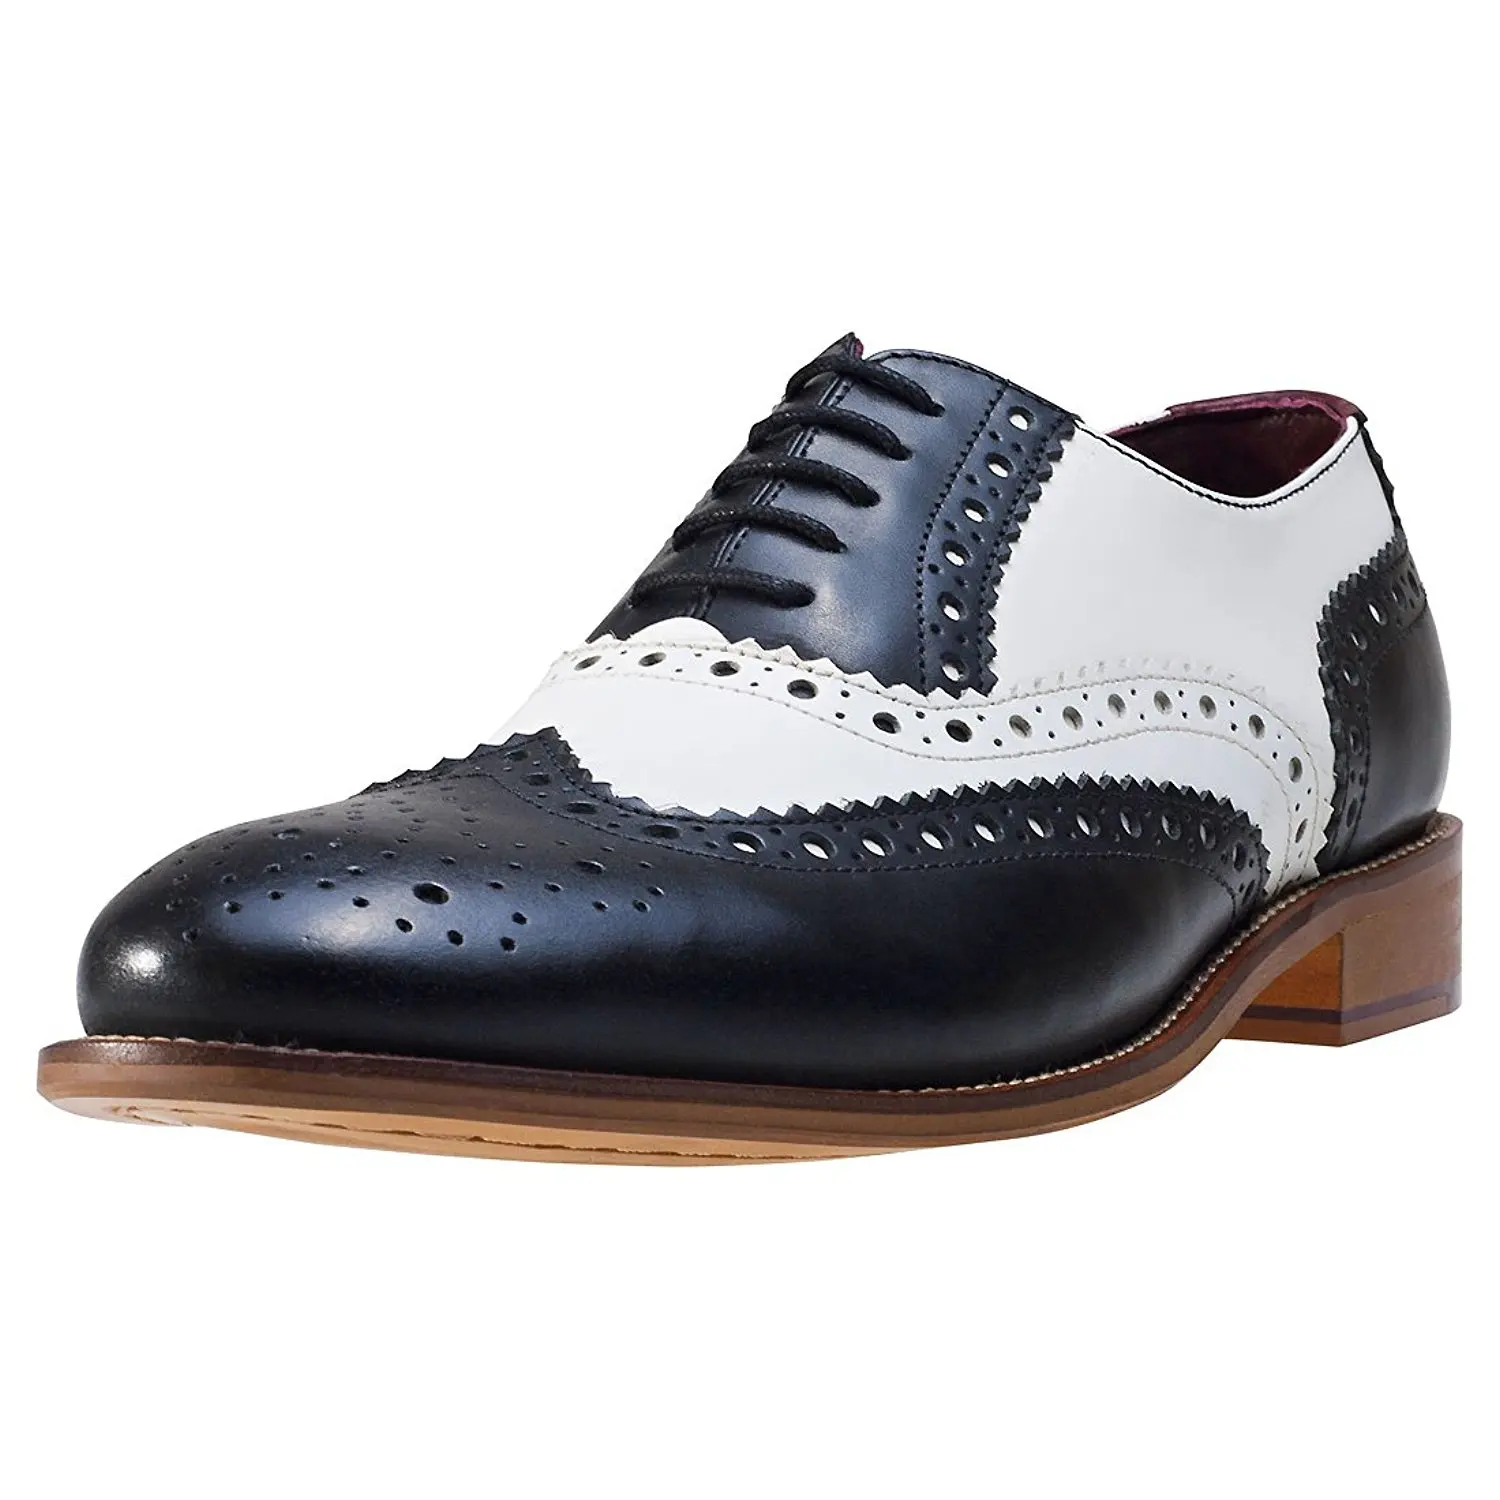 Buy MENS BROGUE GATSBY 20s 30s SPATS JAZZ GANGSTER PIMP SHOES Fancy ...